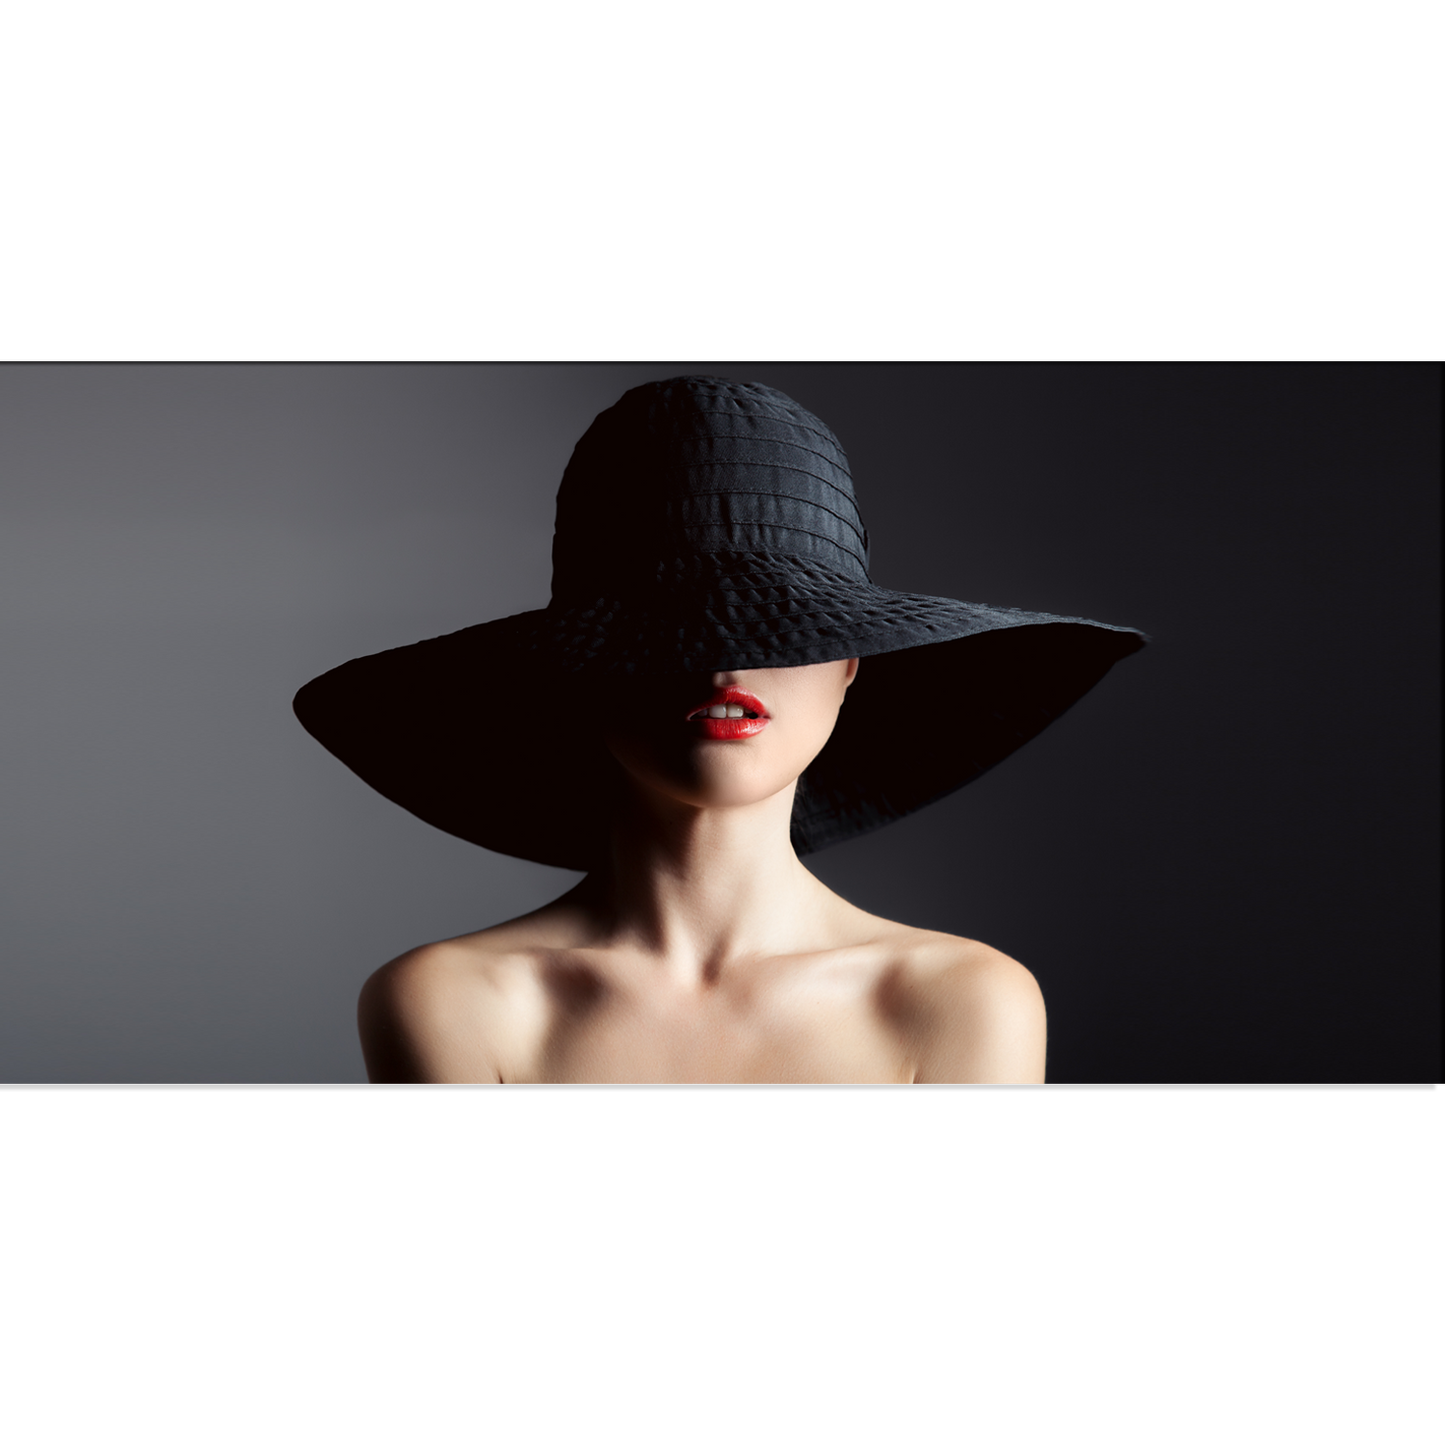 Woman in Hat Canvas Print Wall Painting